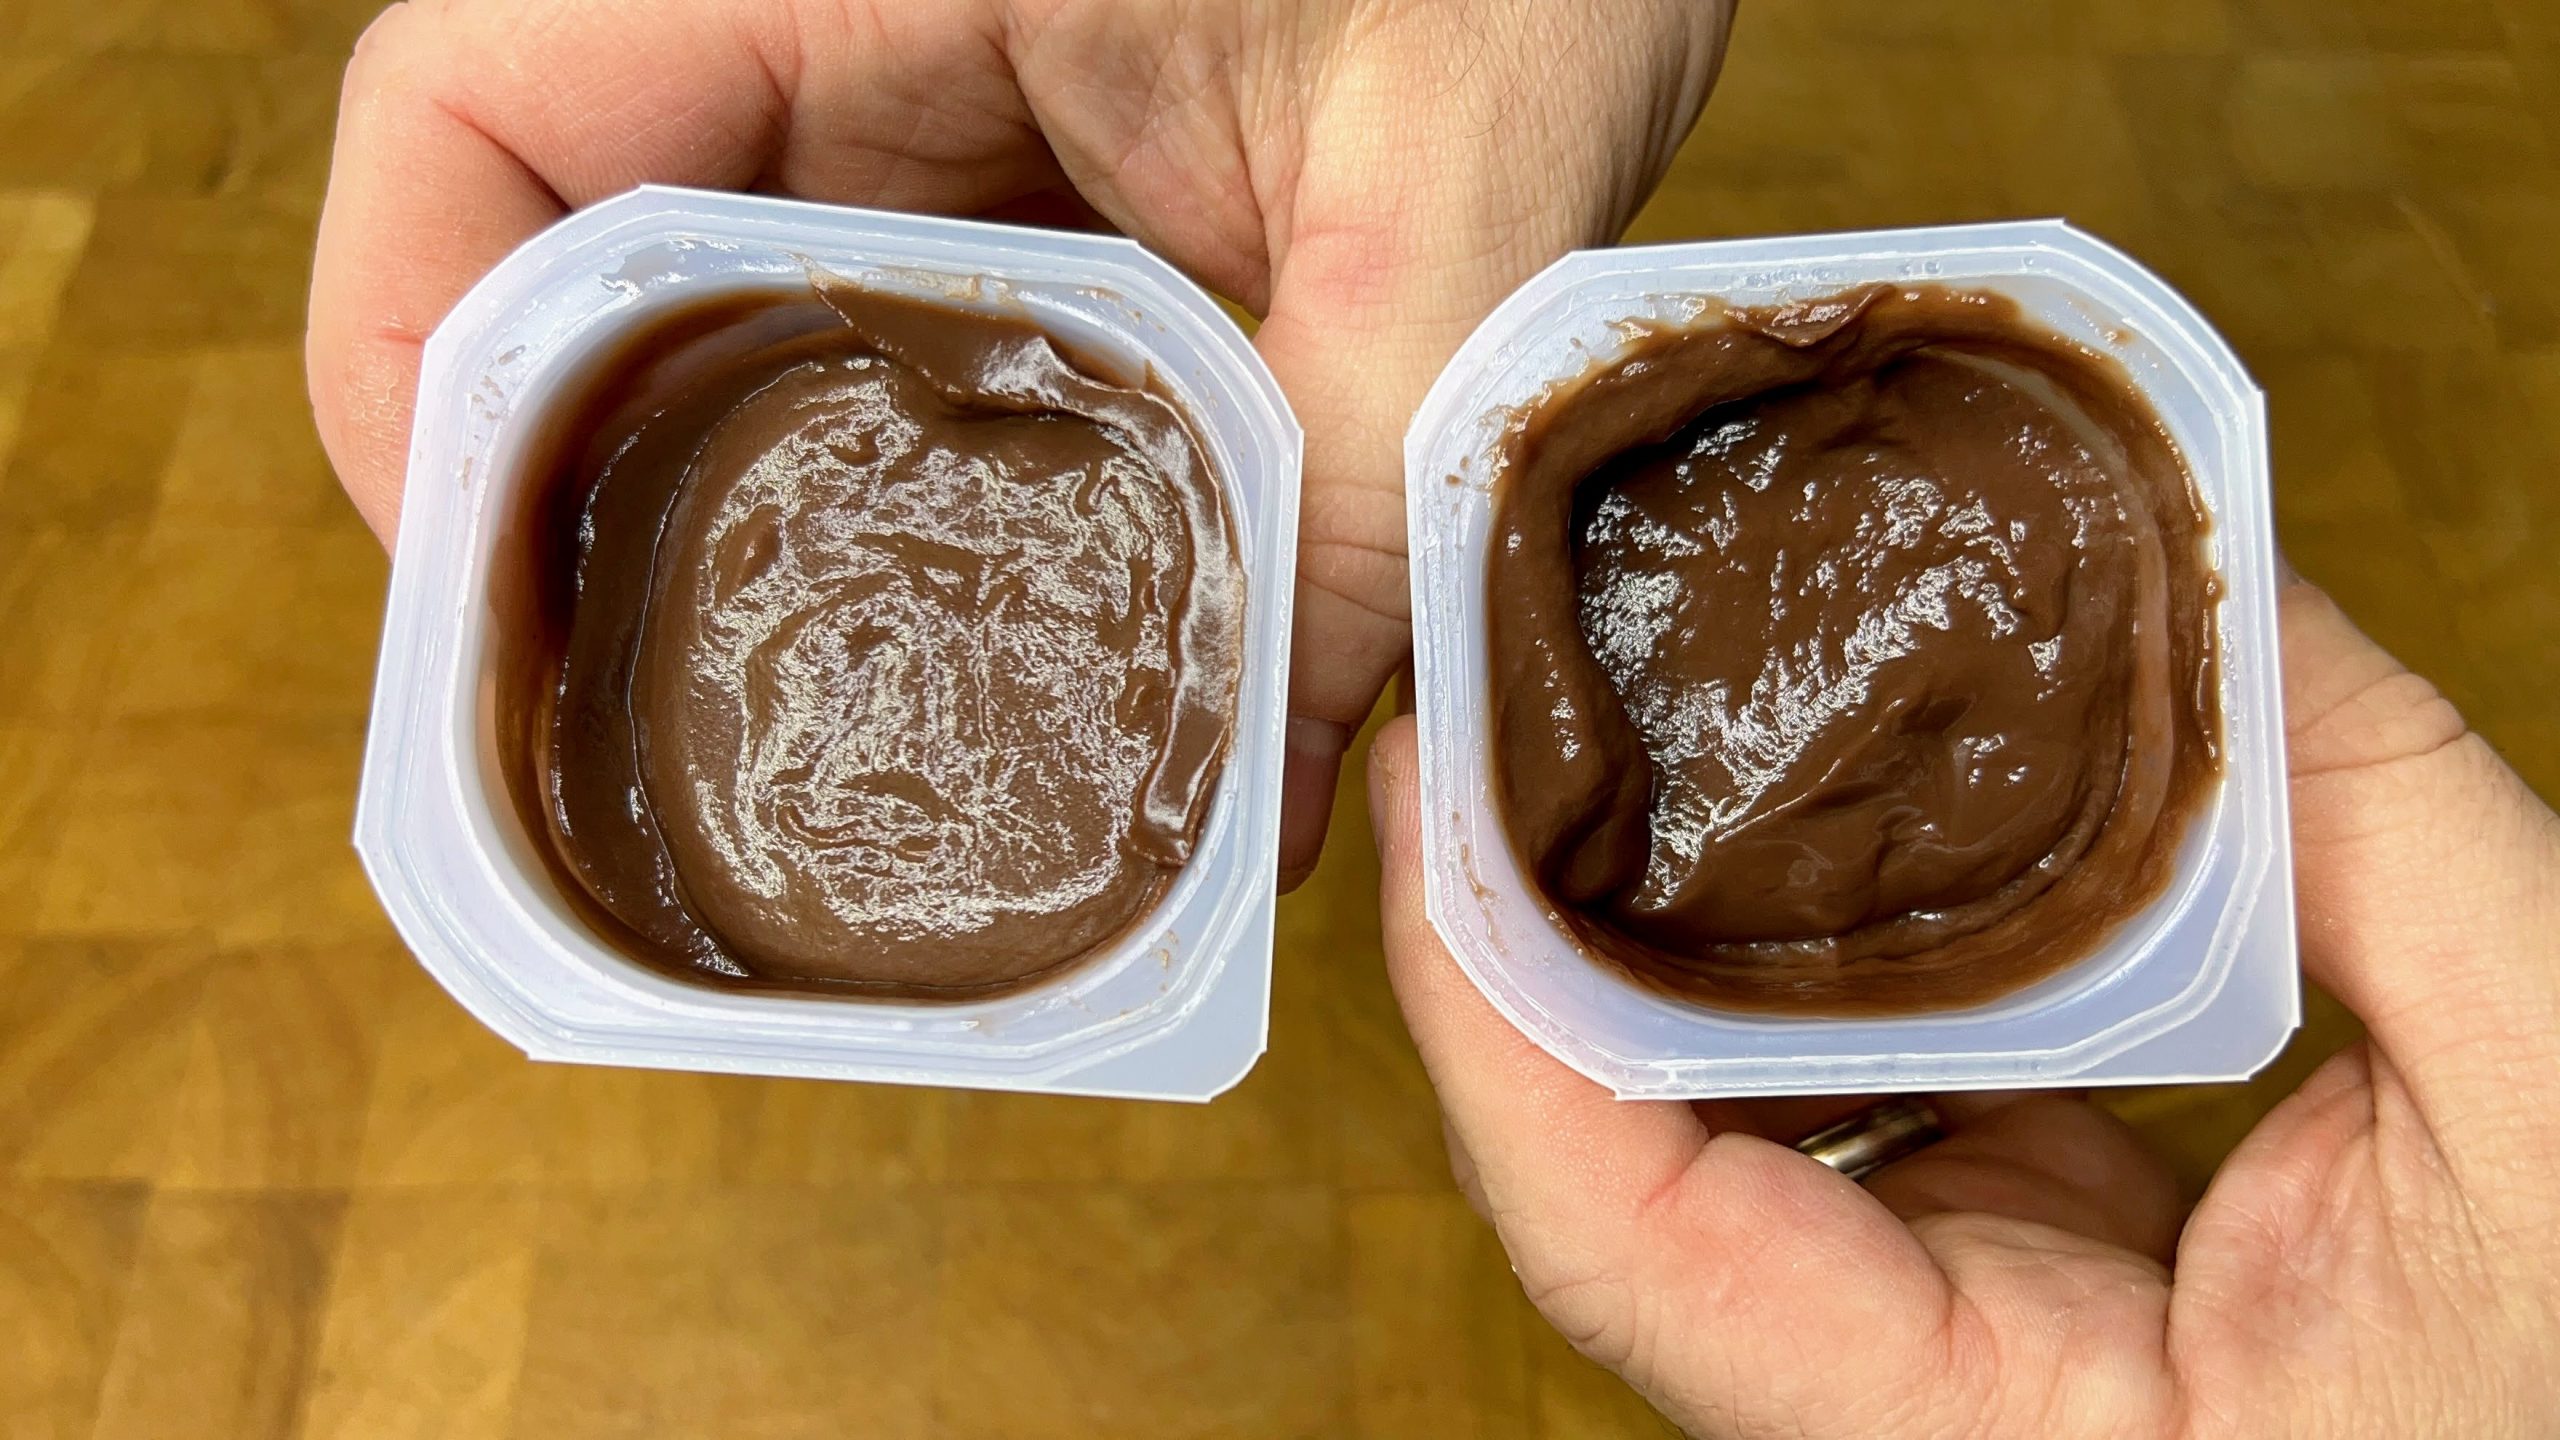 hands holding two containers of pudding: defrosted pudding on left, fresh pudding on right